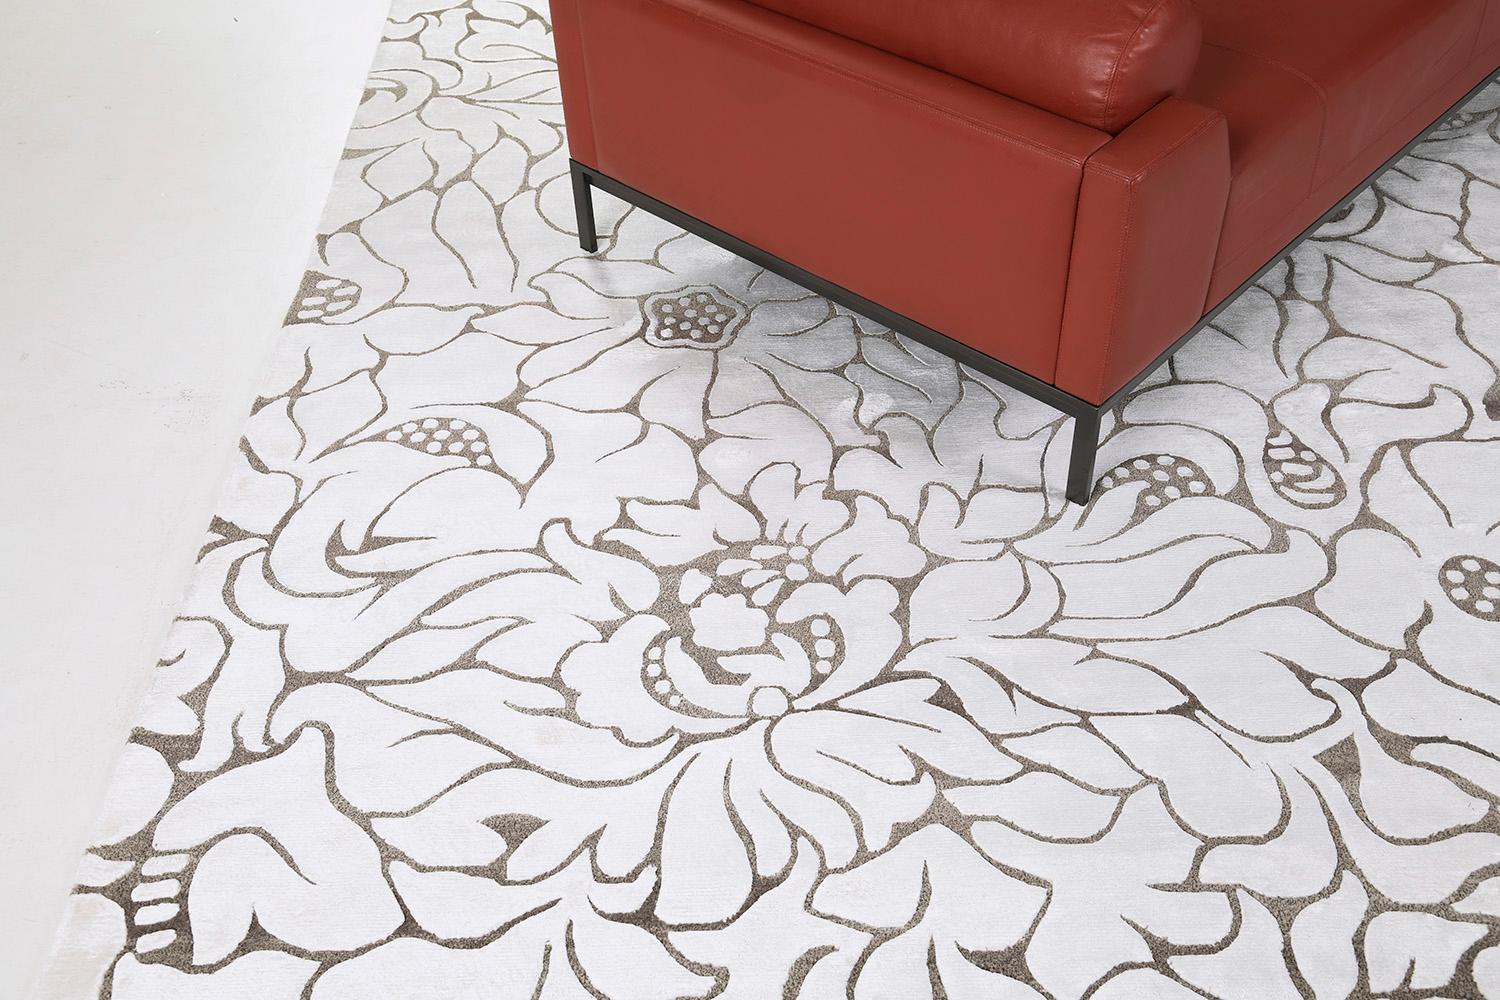 Jardin is a bamboo silk wool that brings out the best of any room space. It's the grayscale doodled theme and outlined floral works that make an outstanding piece of art. Adding these to your collection will be a great investment in a modern